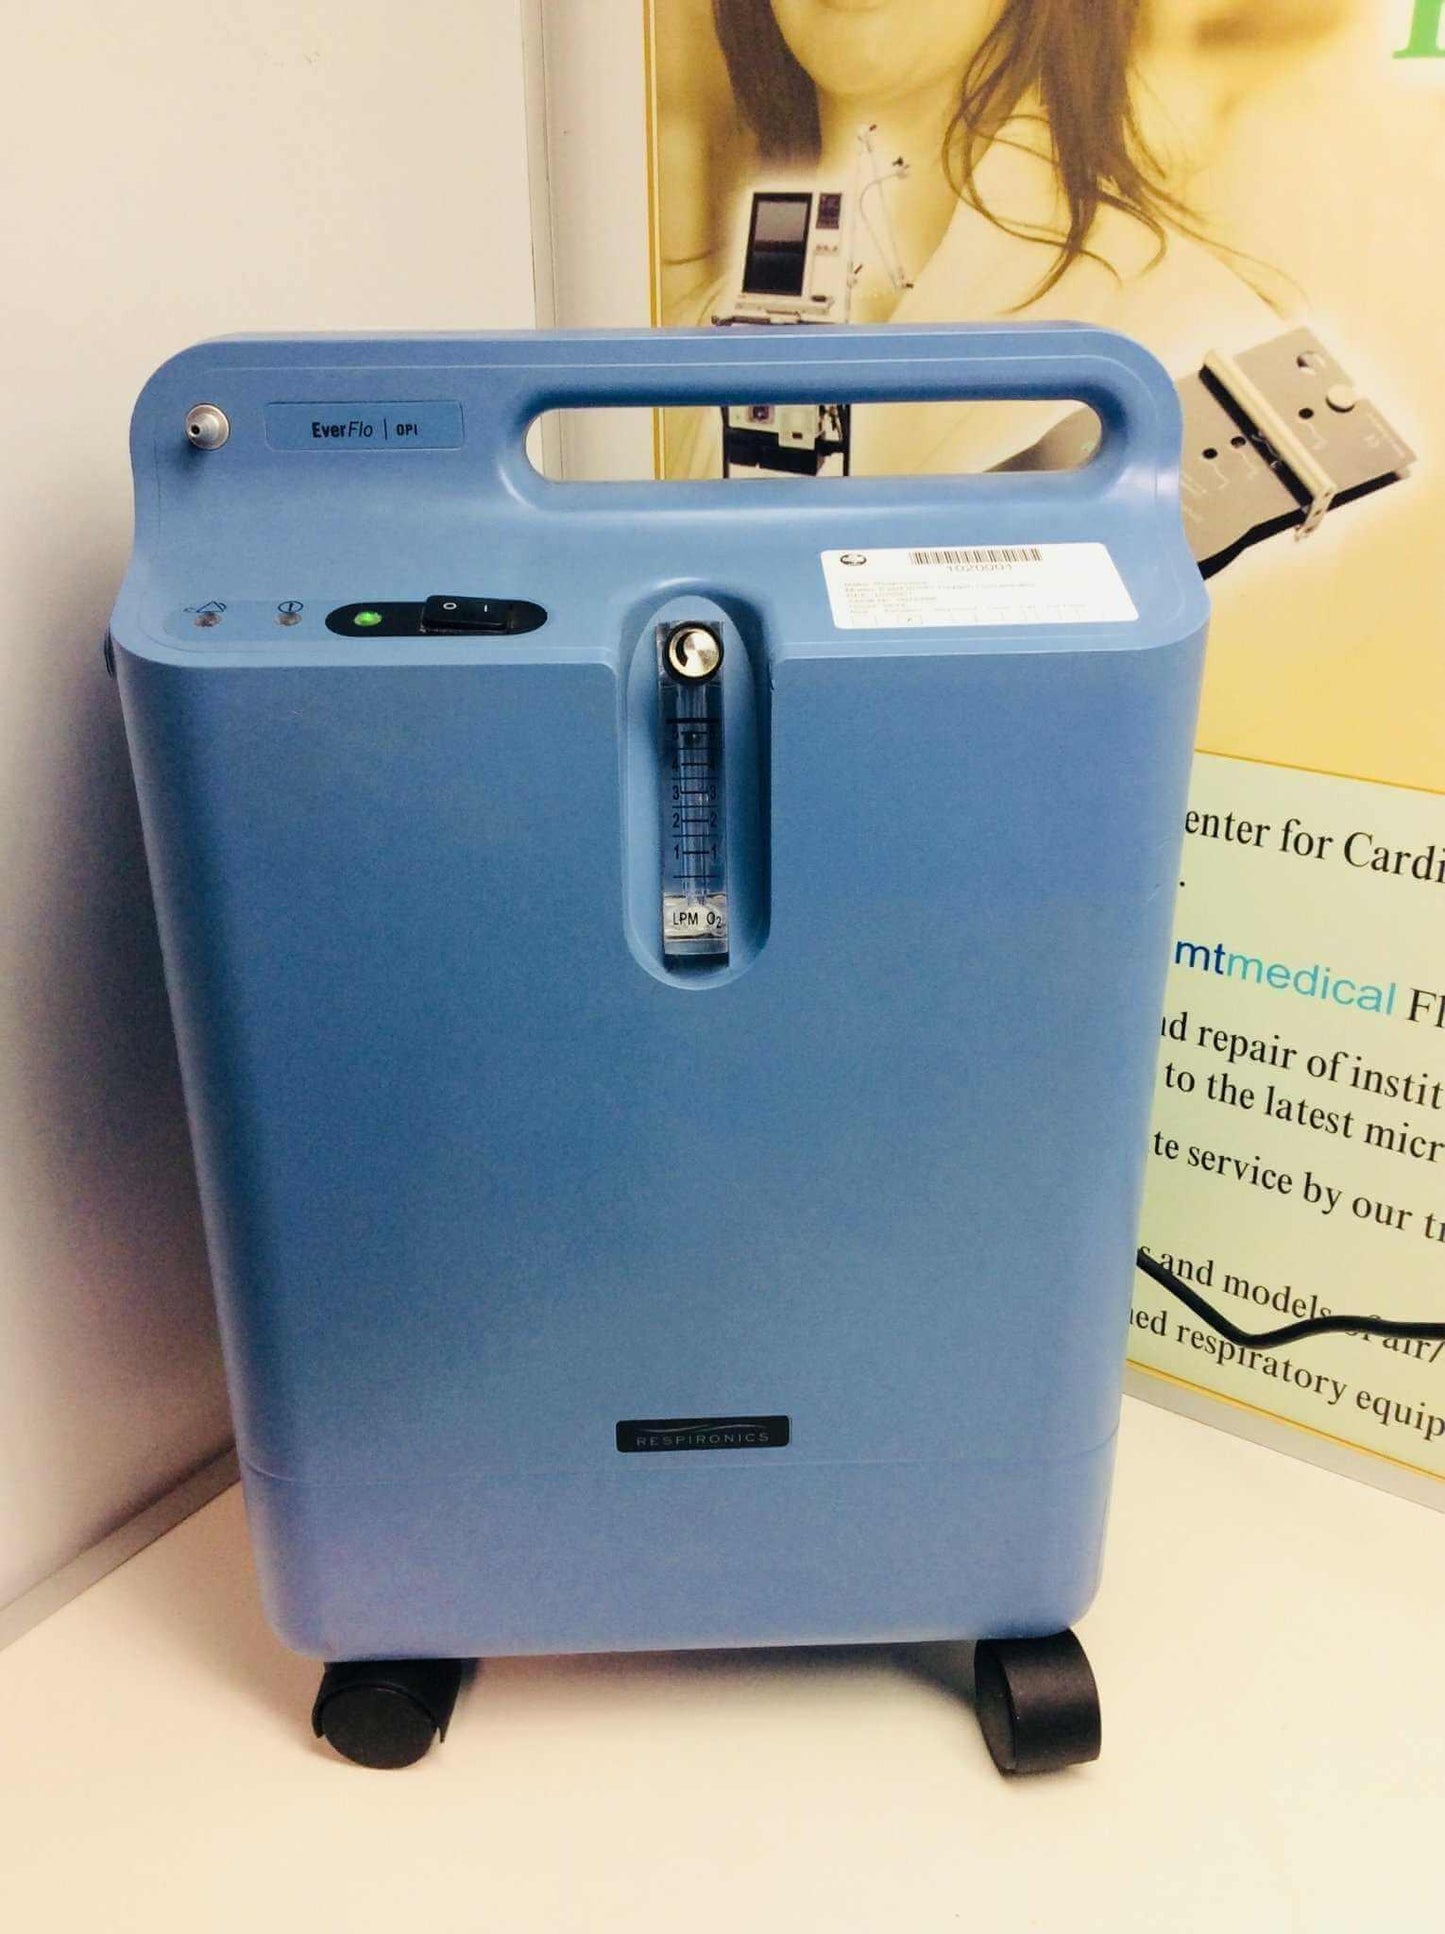 REFURBISHED Philips Respironics EverFlo Oxygen Concentrator OPI 5 Liter 1020001 WARRANTY FREE SHIPPING - MBR Medicals